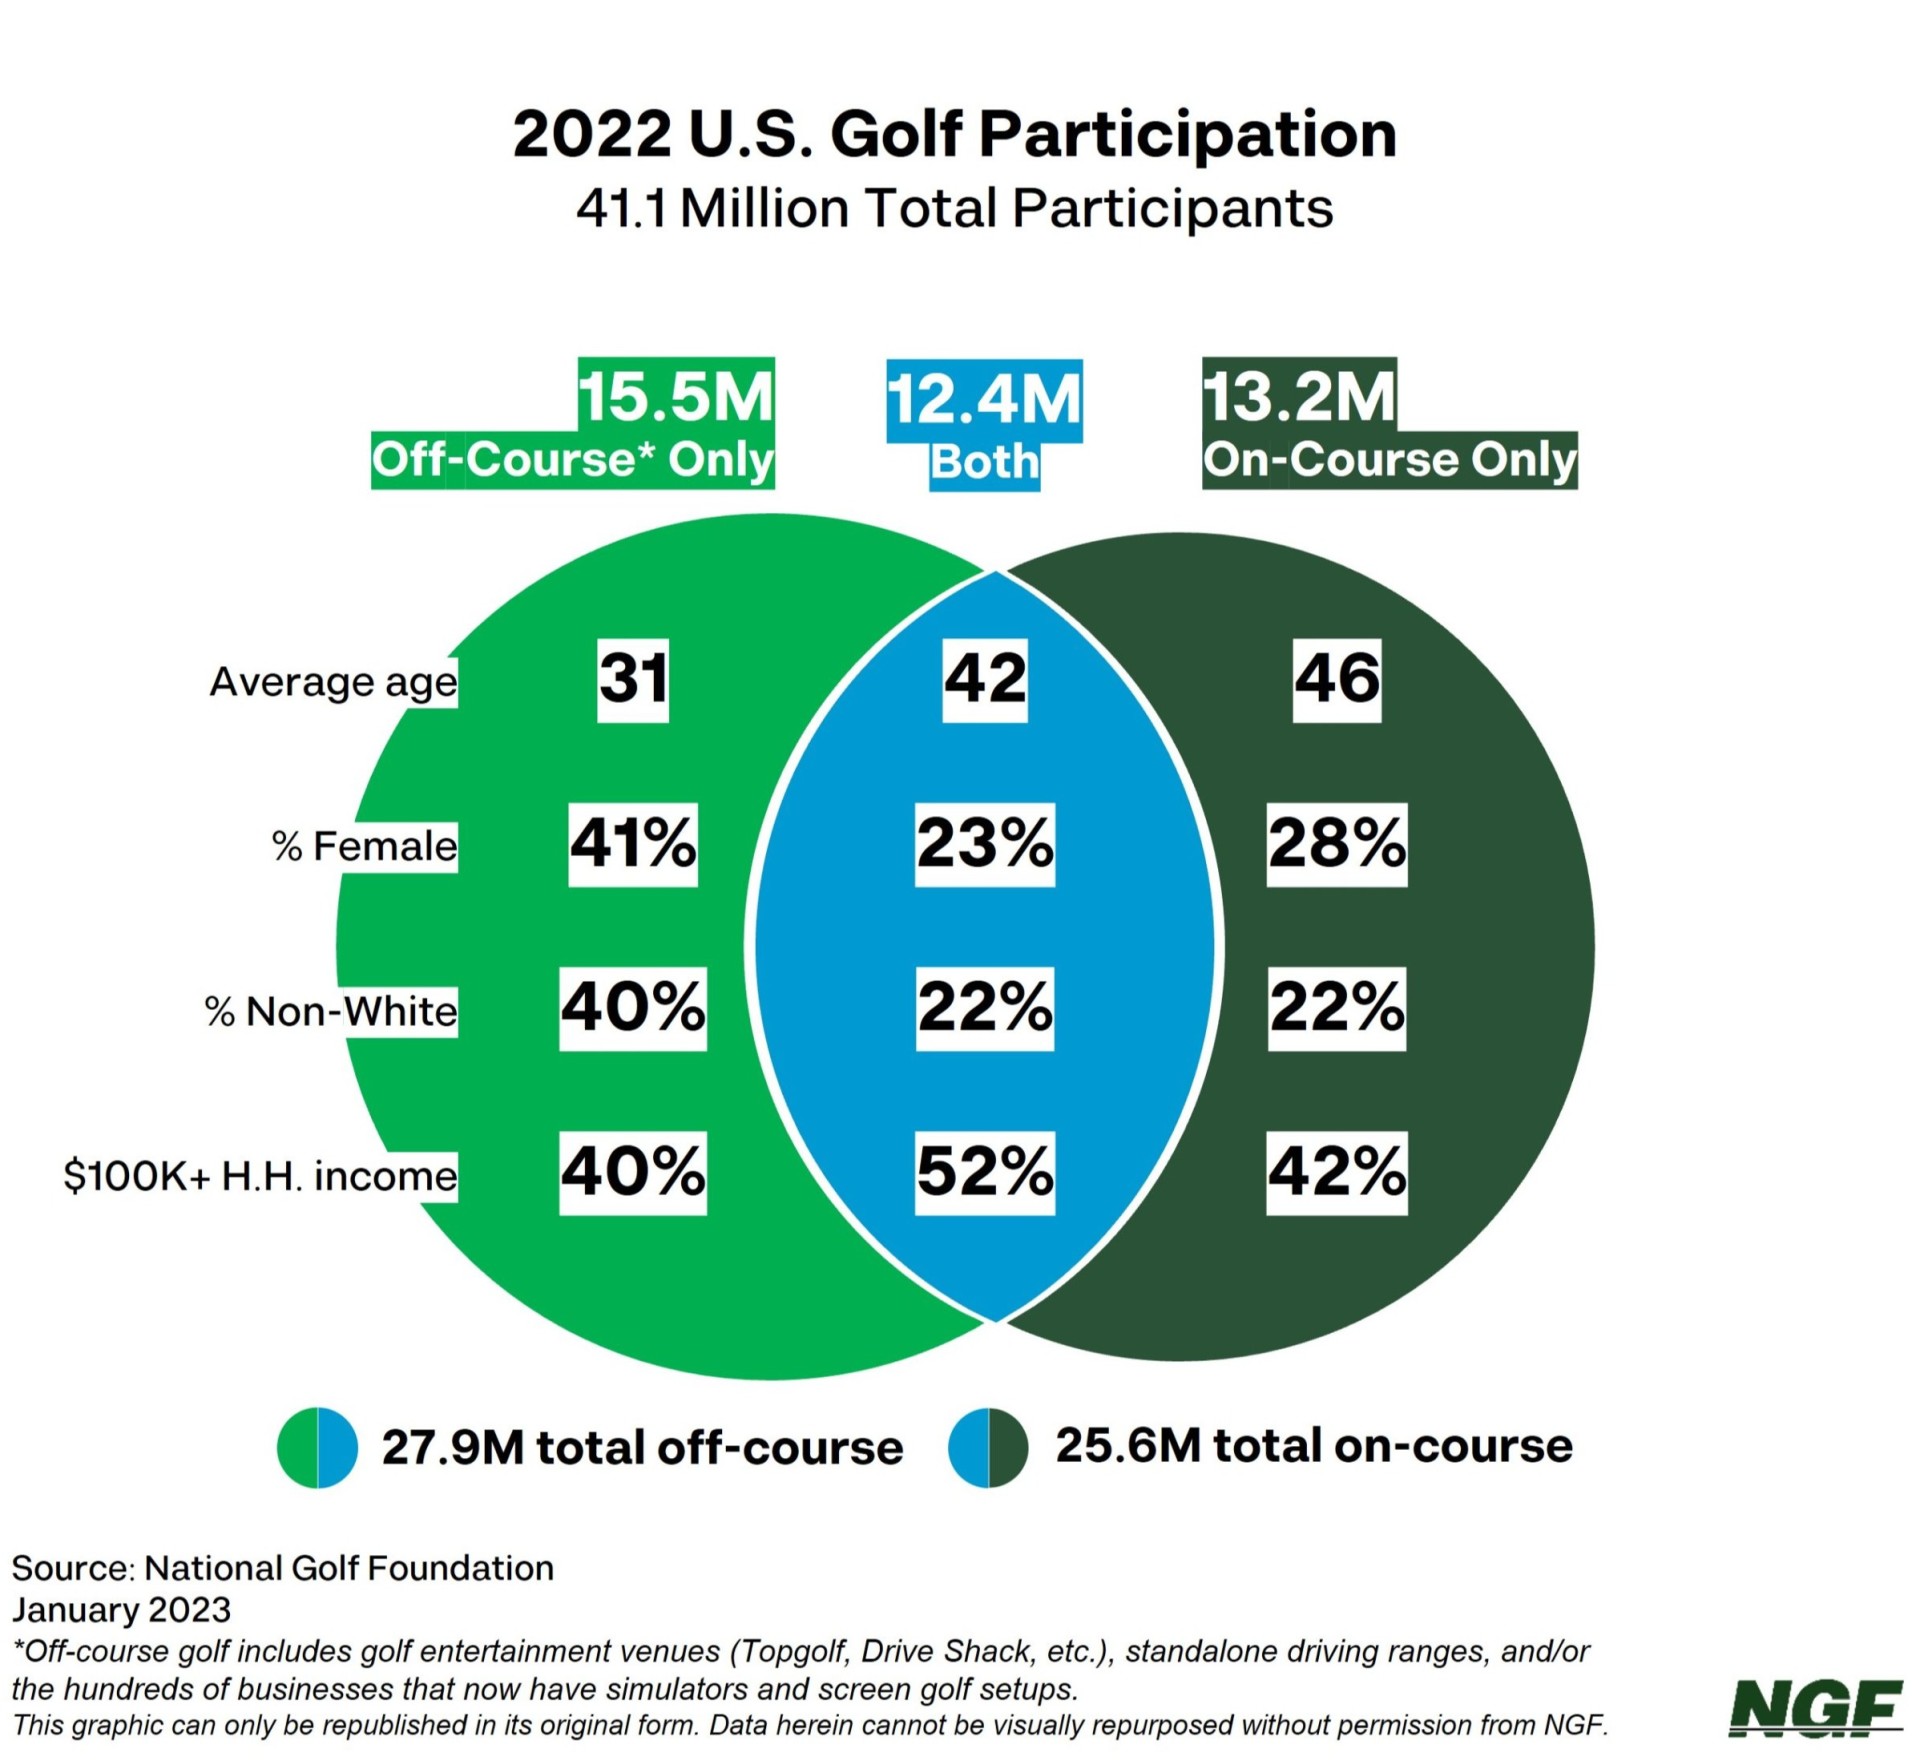 Graph of the 2022 U.S. Golf Participation made by the National Golf Foundation (NGF).